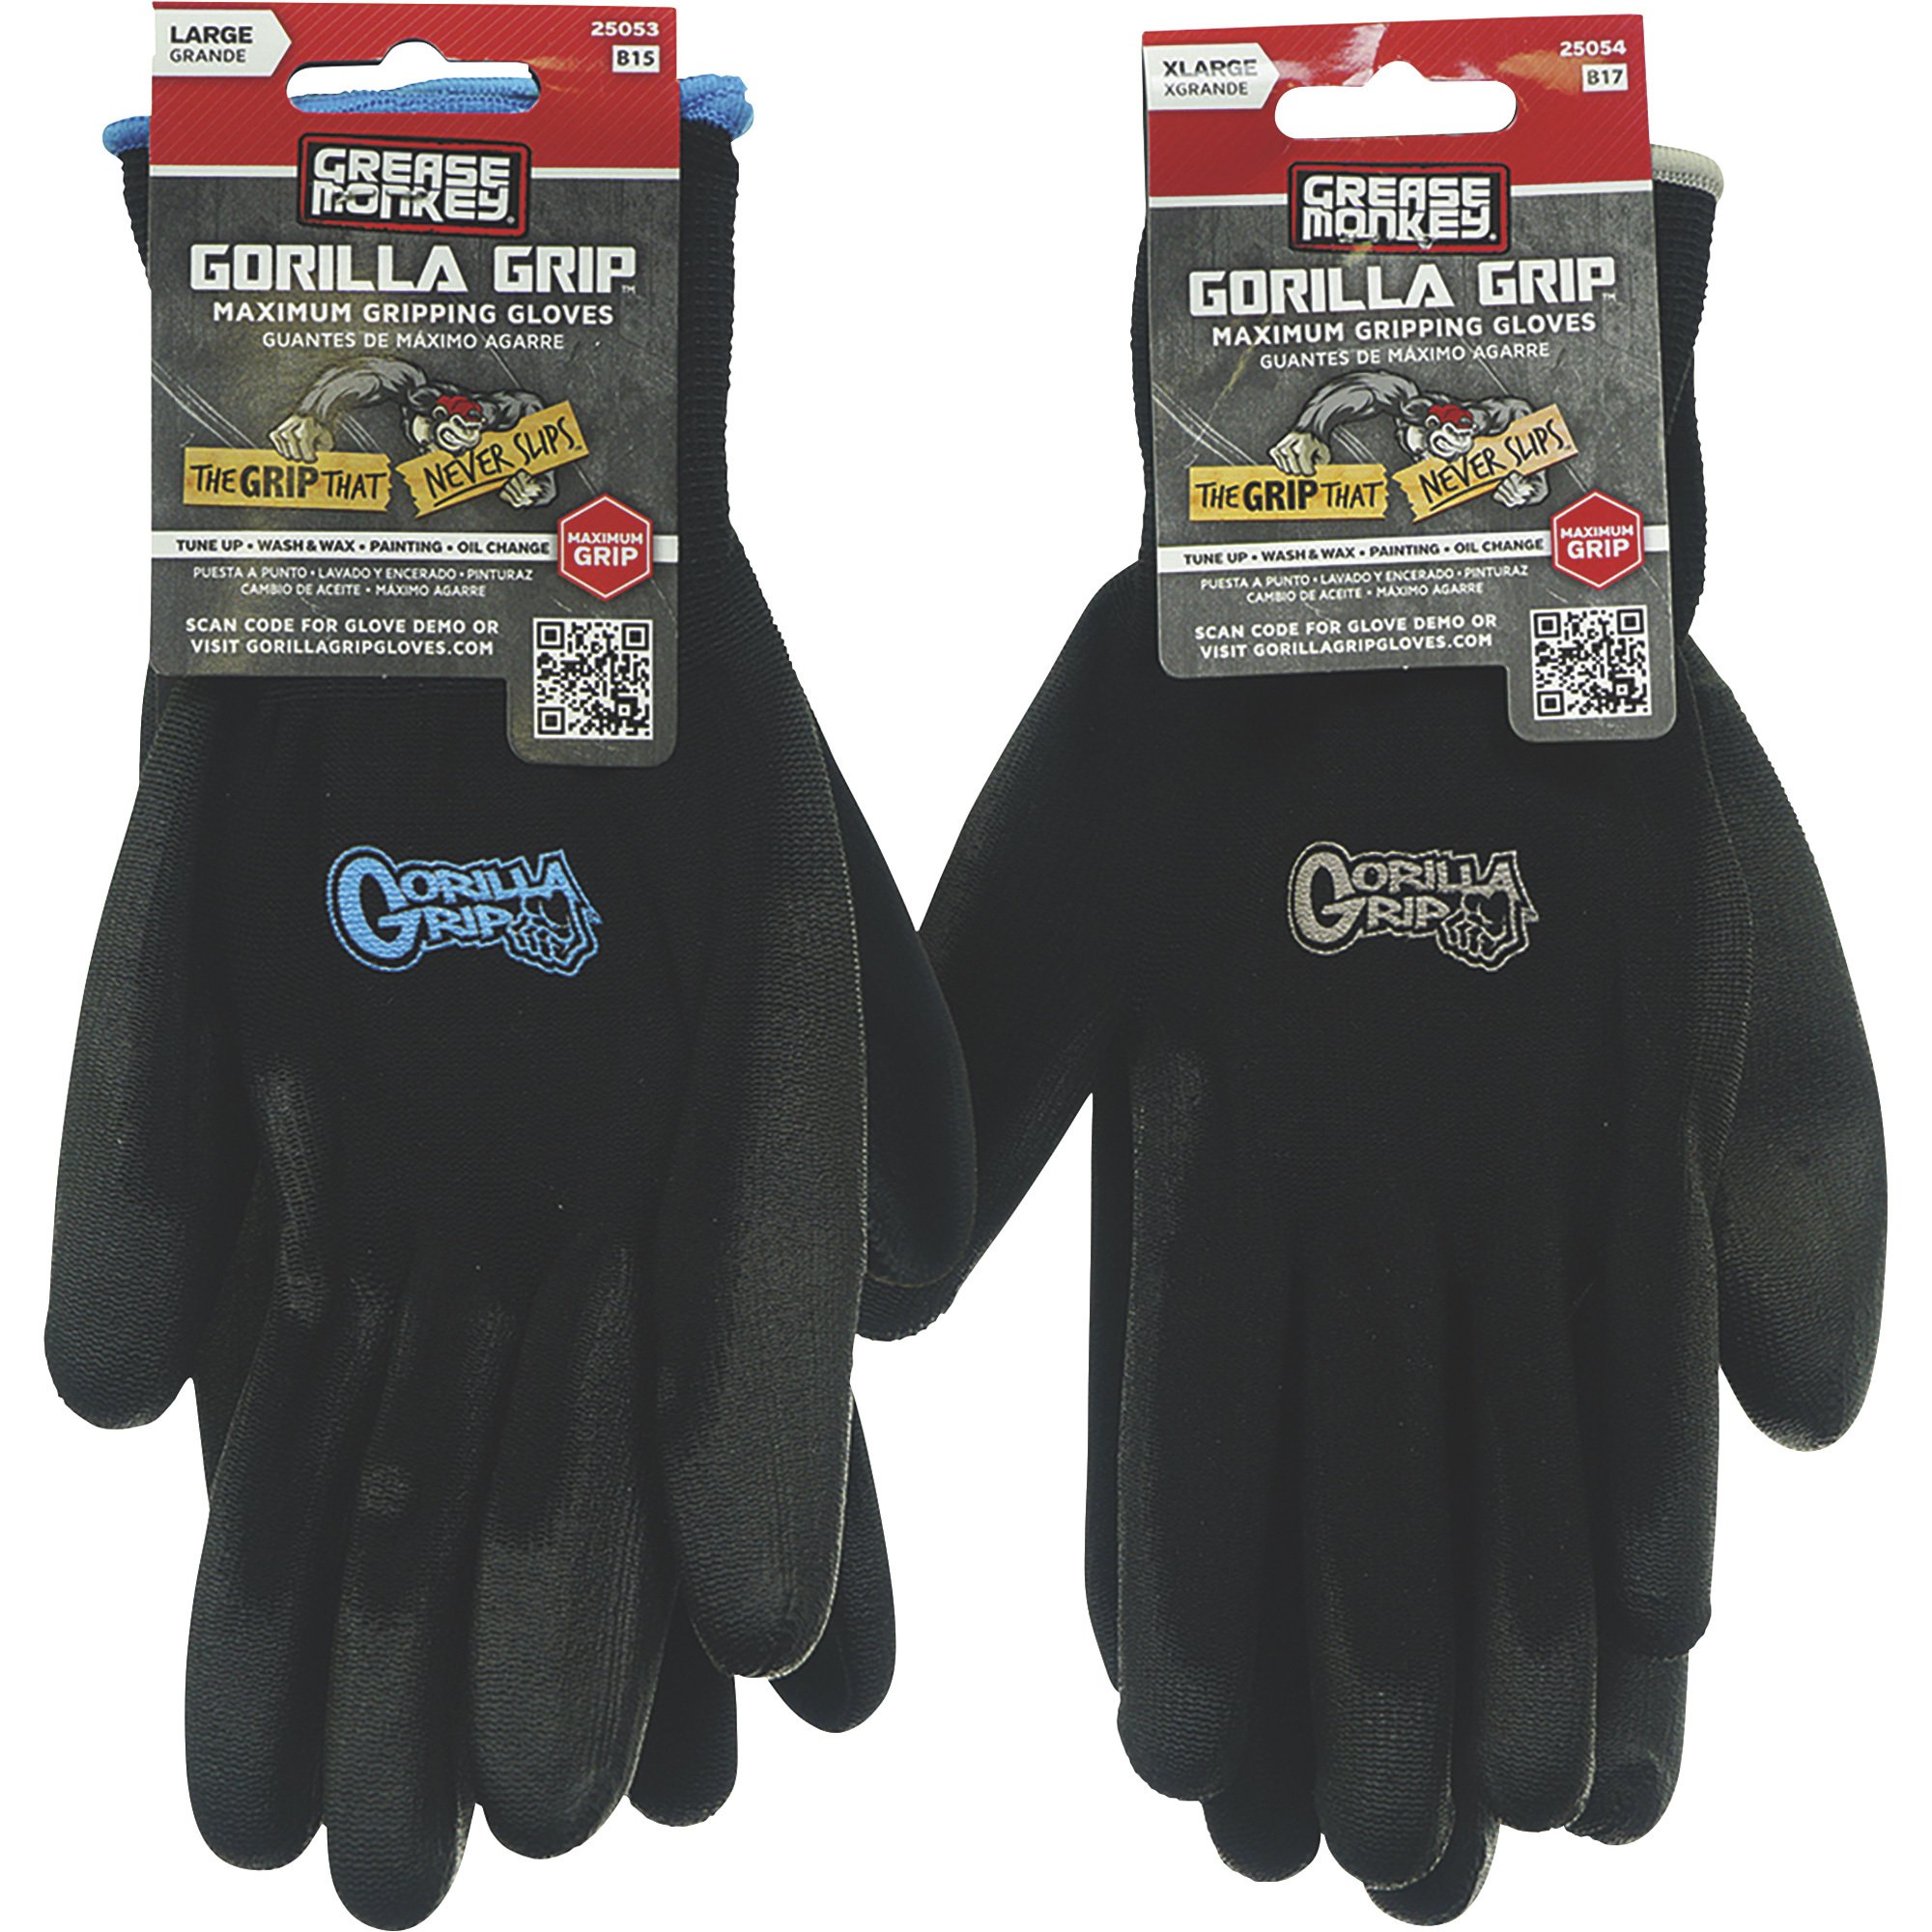 Gorilla Grip Gloves: The Inventive Fishing Gear Review 